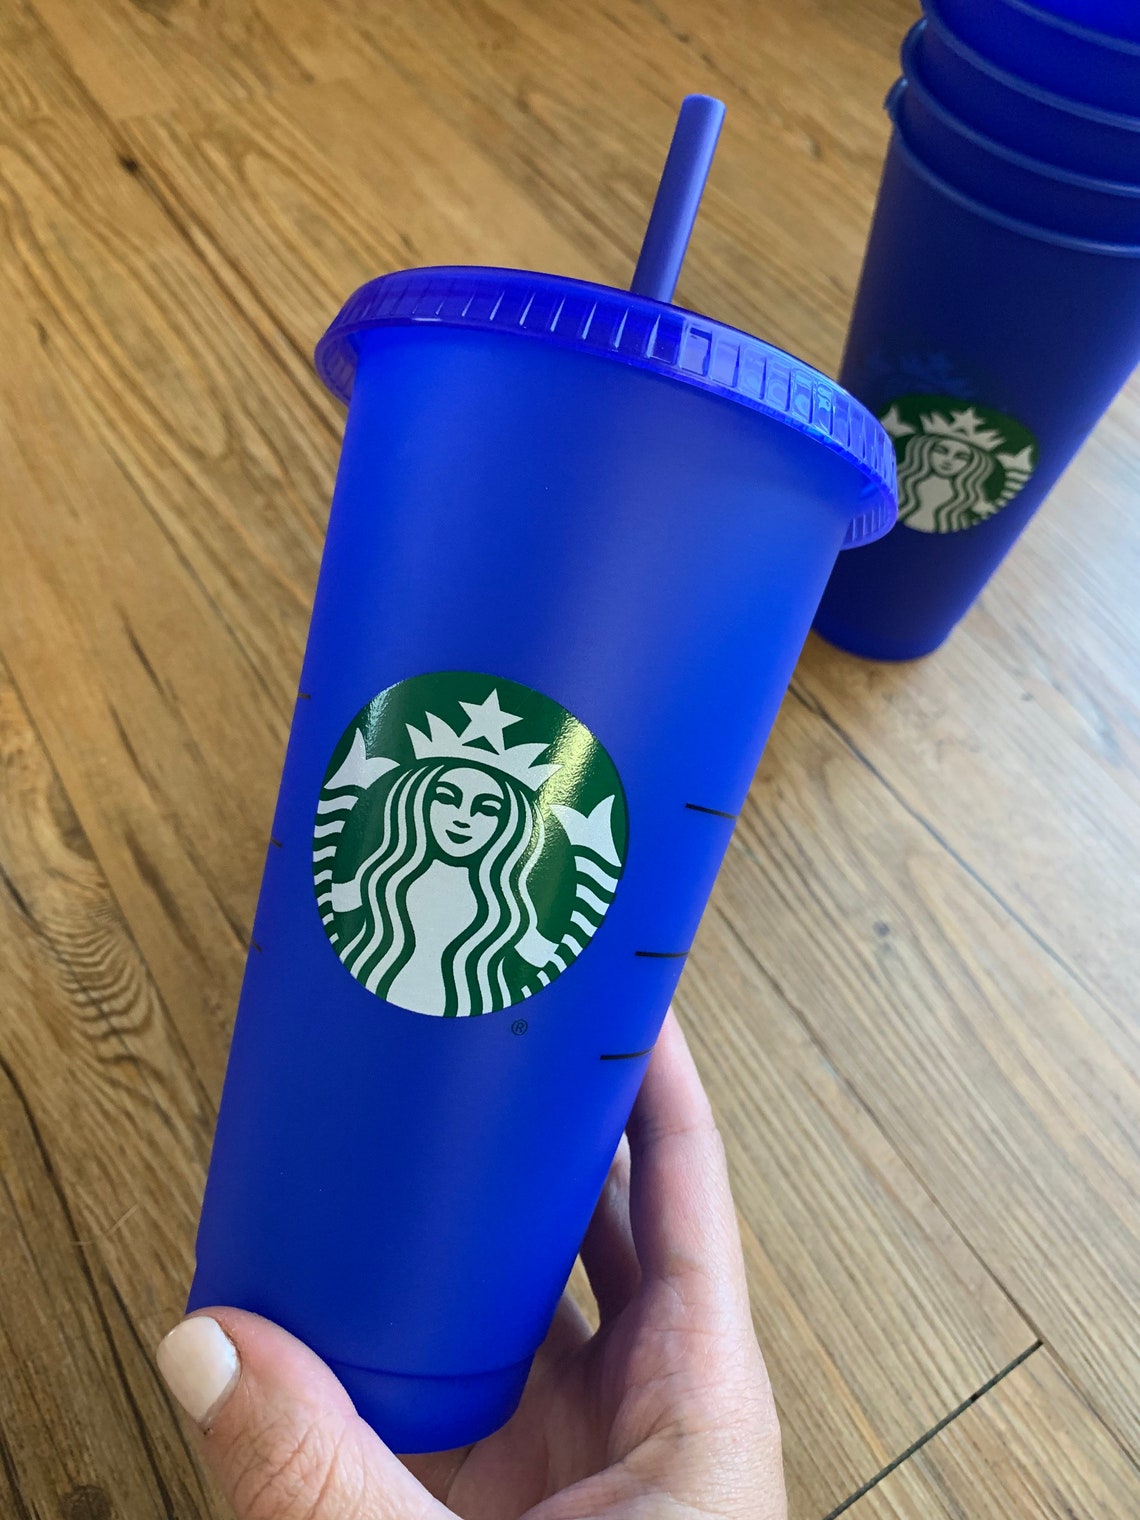 LIMITED EDITION Starbucks blue color changing cup Etsy